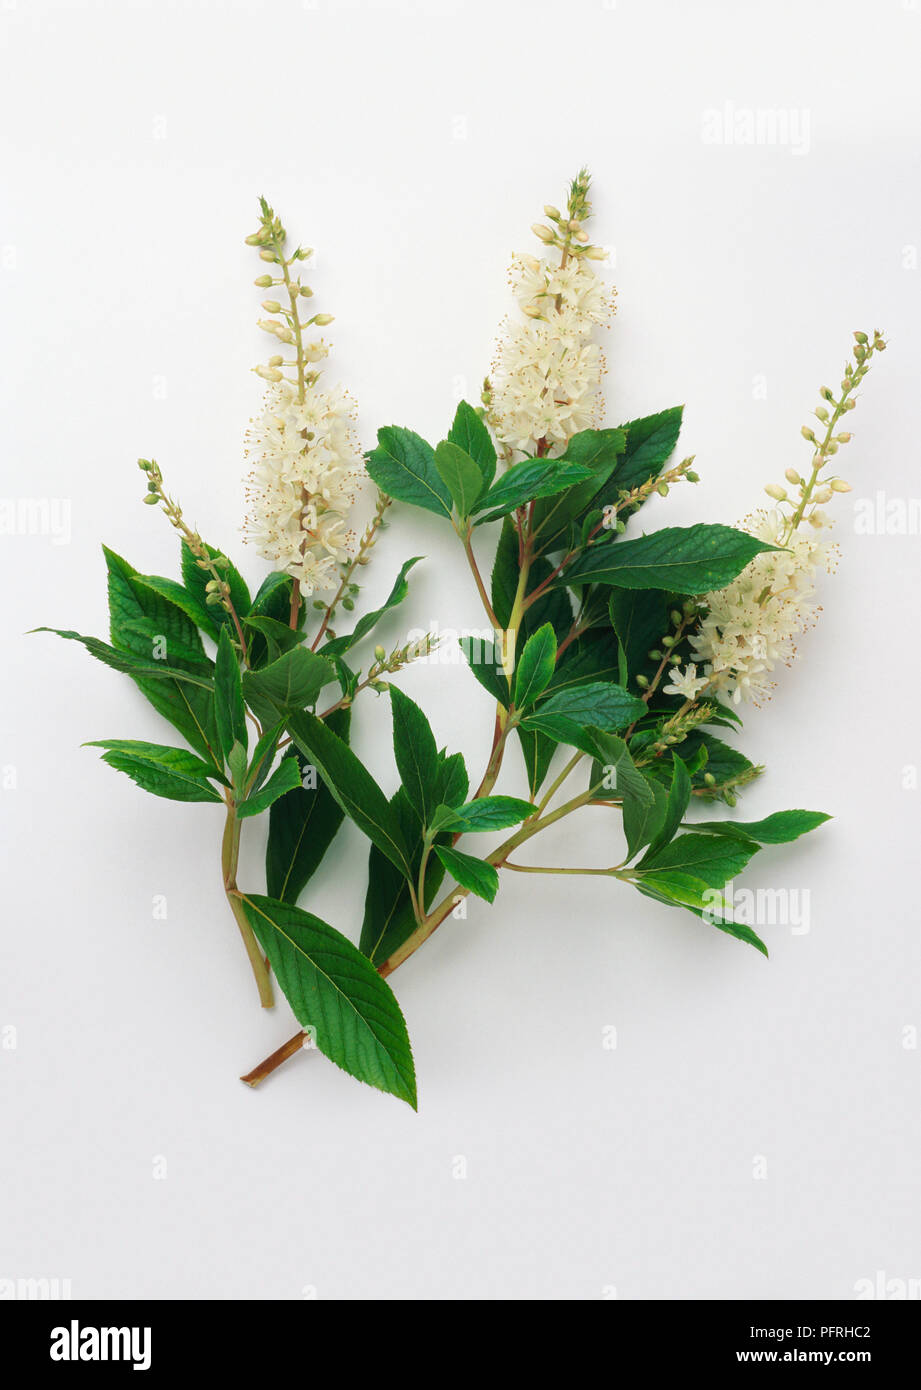 Clethra alnifolia (Sweet pepperbush), with toothed leaves and white flowers Stock Photo